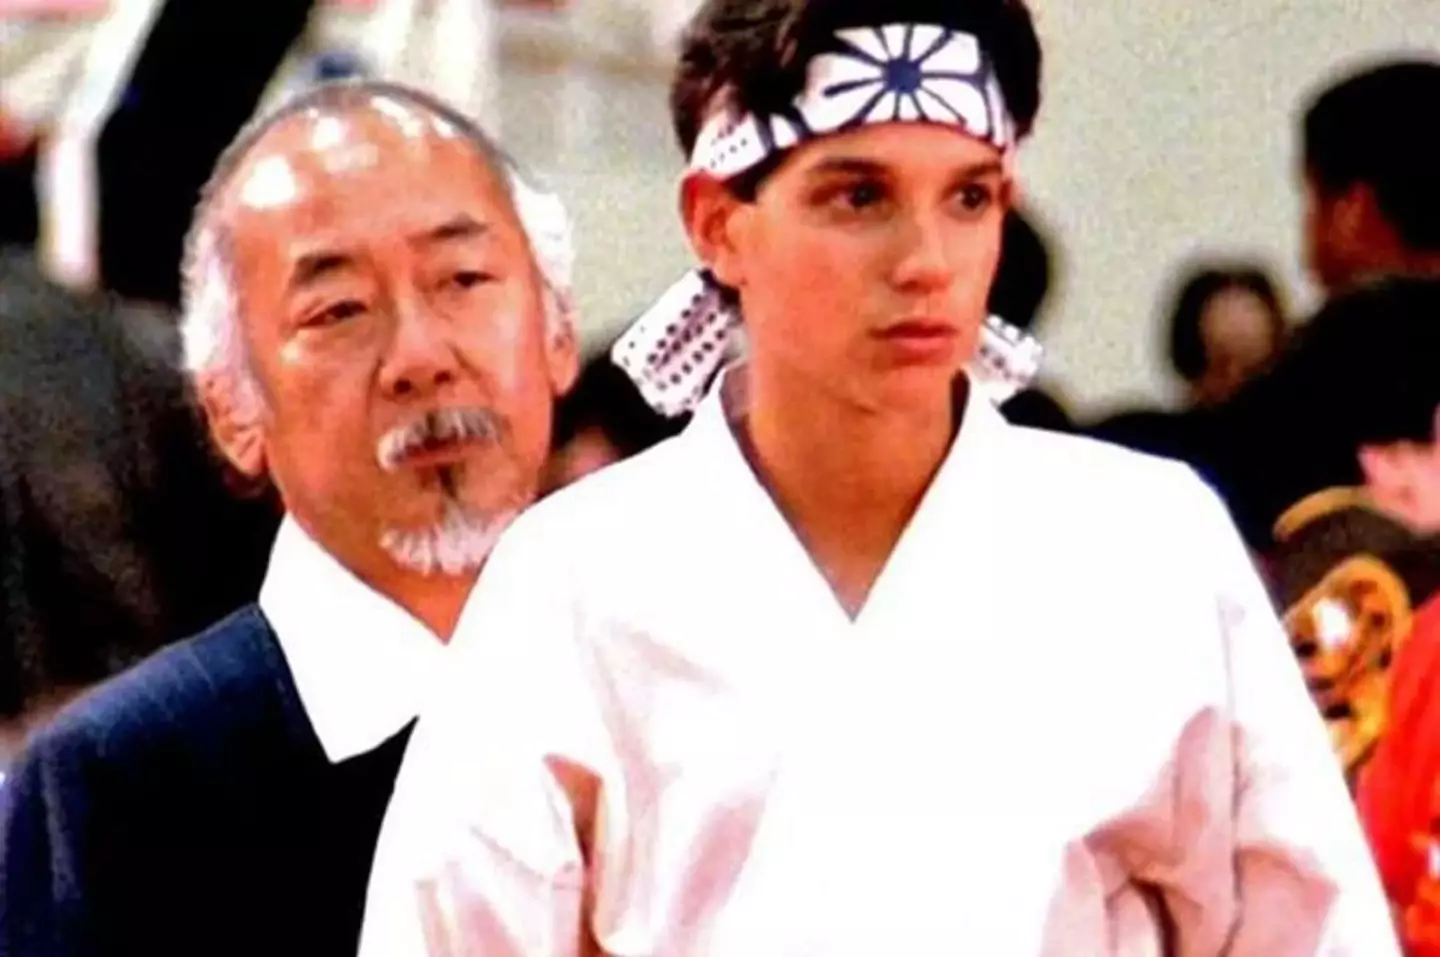 Will we find out Mr Miyagi's backstory?